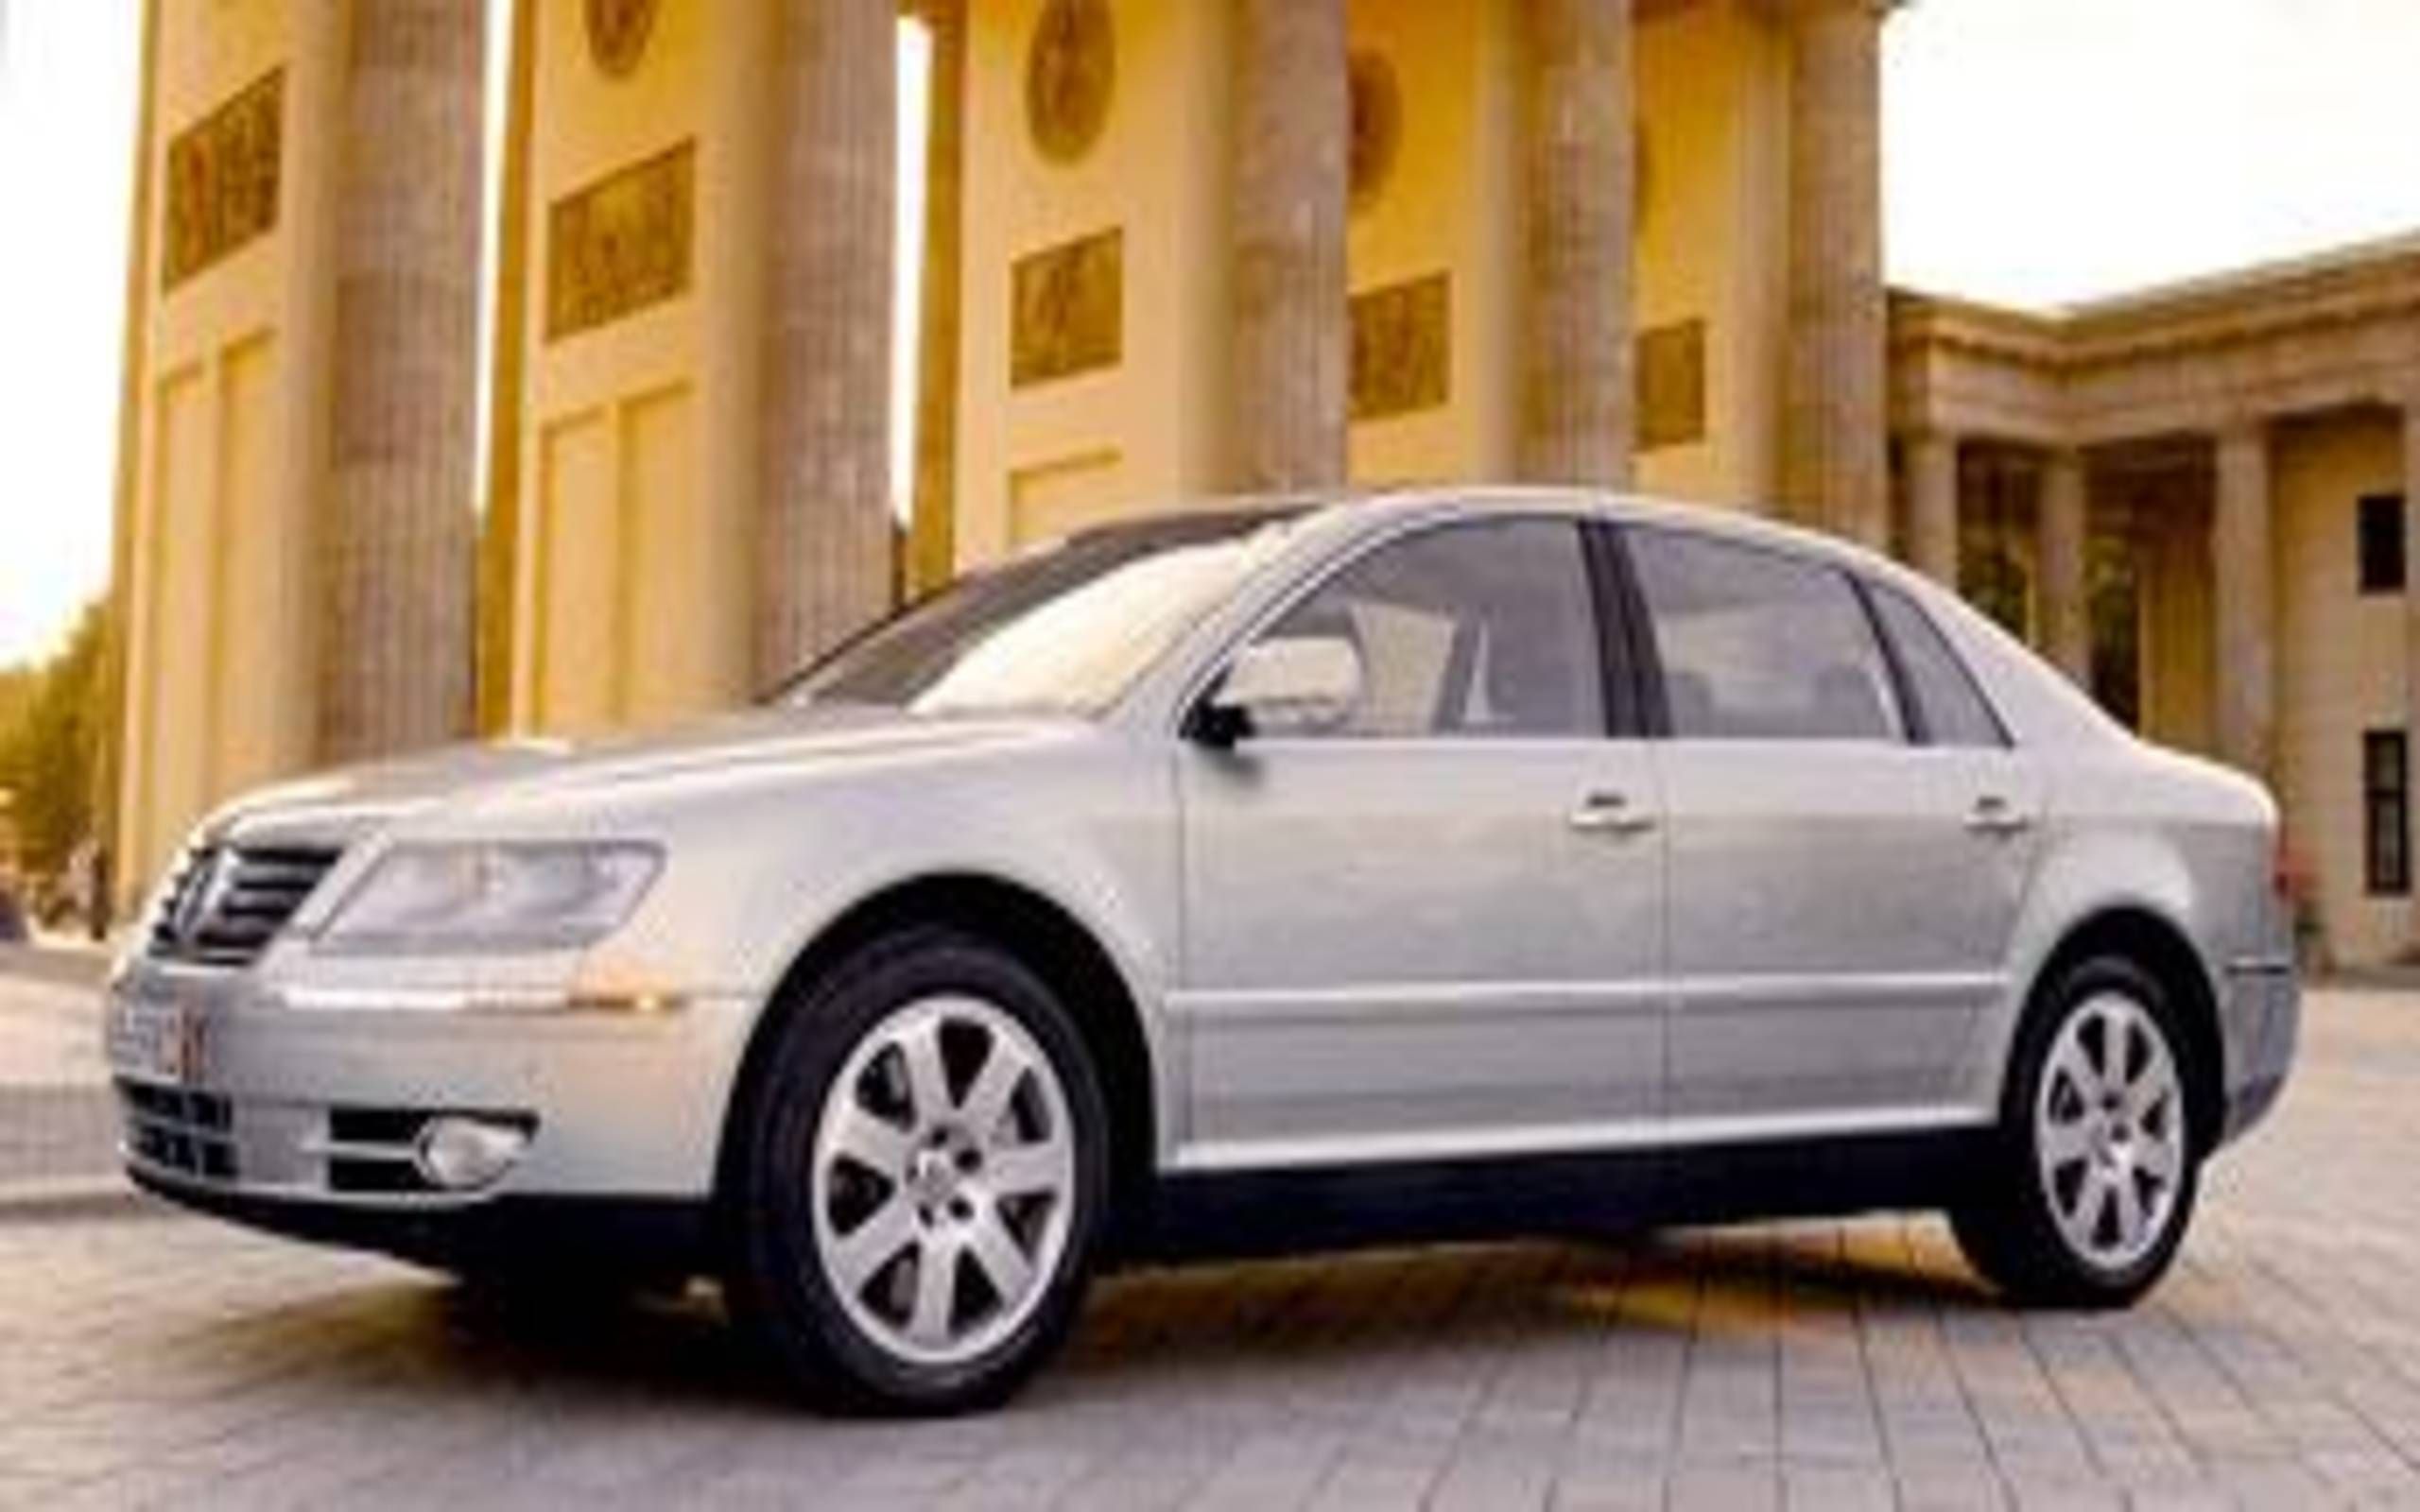 2004 Volkswagen Phaeton: Playing With The Big Dogs: VW's Phaeton May Be The  Best Big German Sedan For The Money